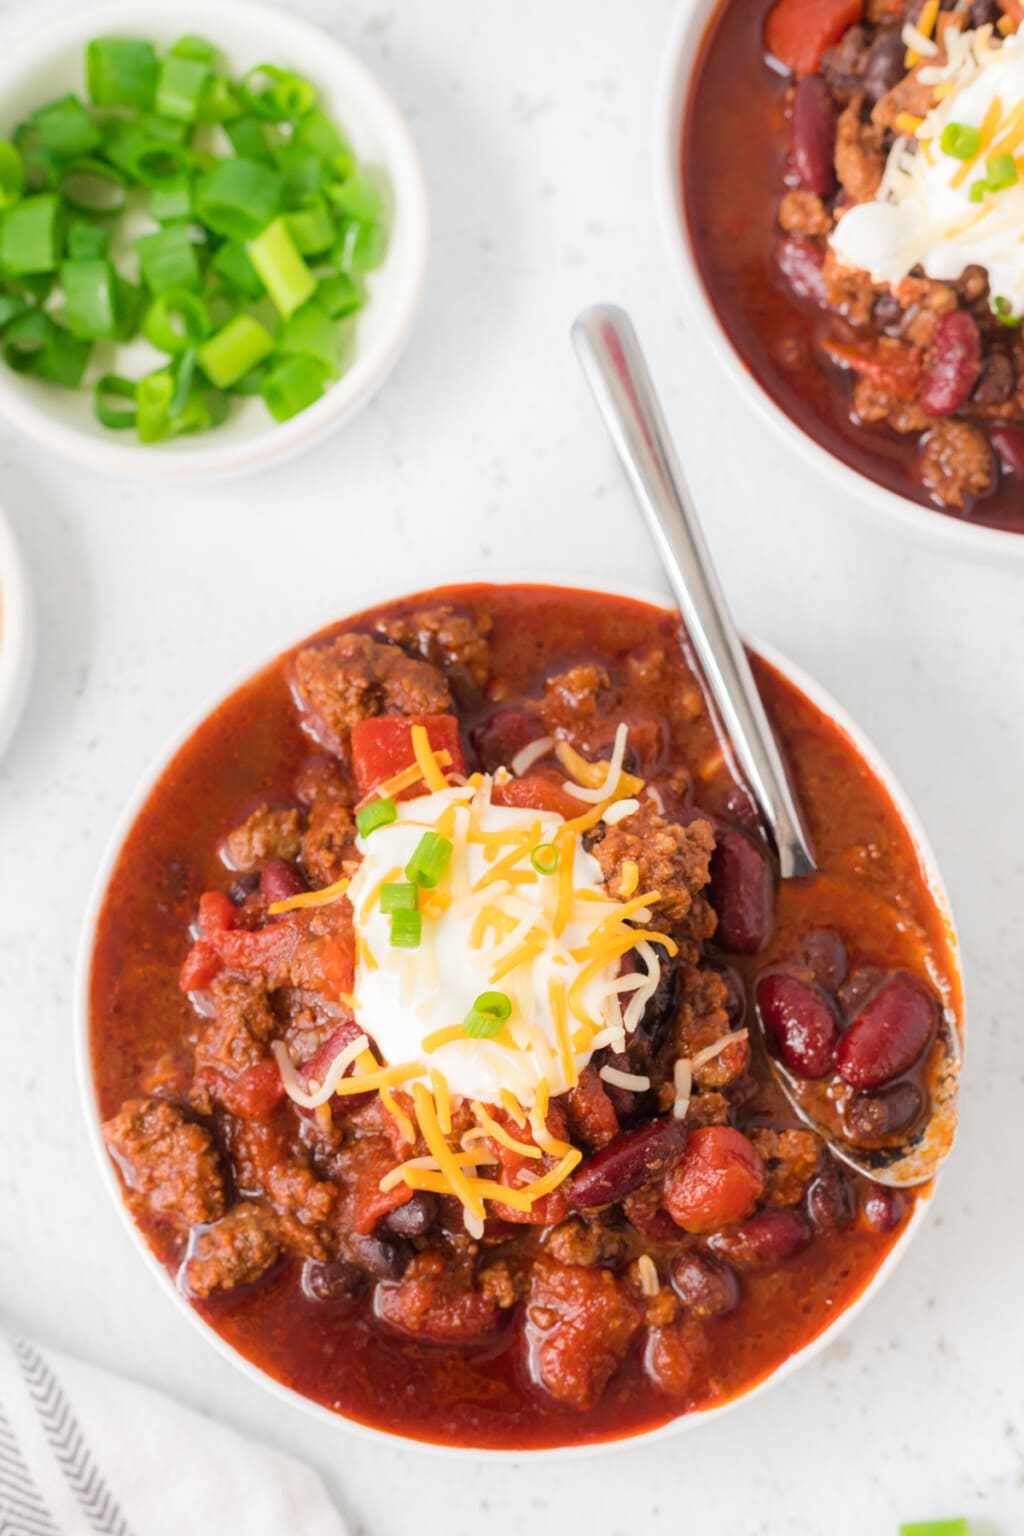 Easy Chili Recipe | Kitchen Fun With My 3 Sons